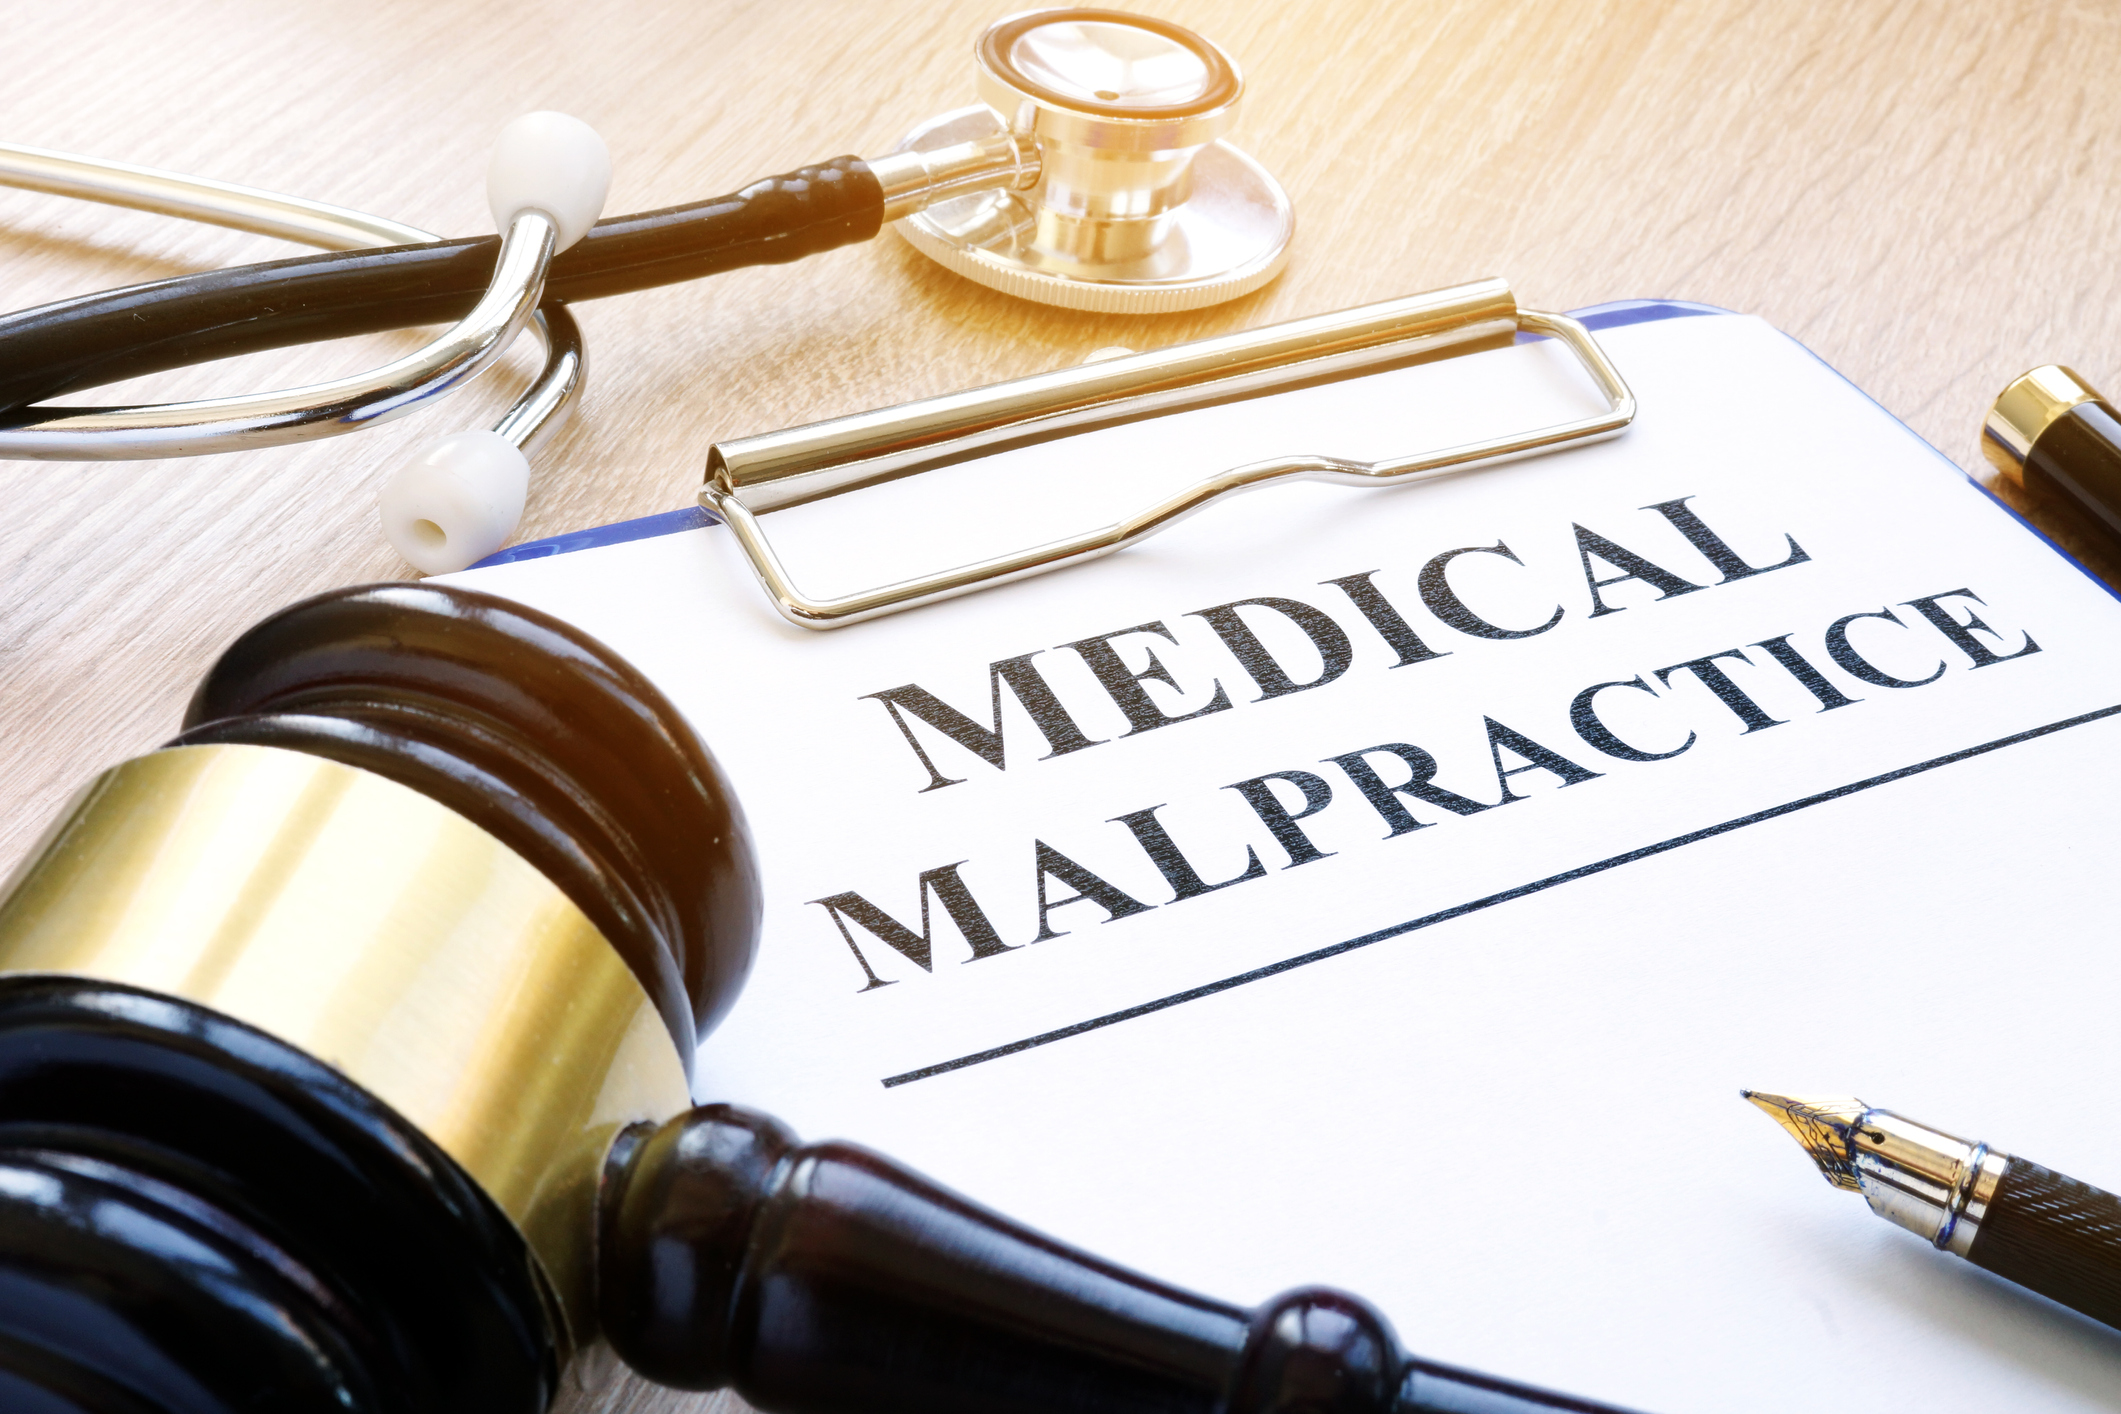 Medical Malpractice Victim’s Claim Dismissed for Failure to Provide Timely Notice to Public Entity